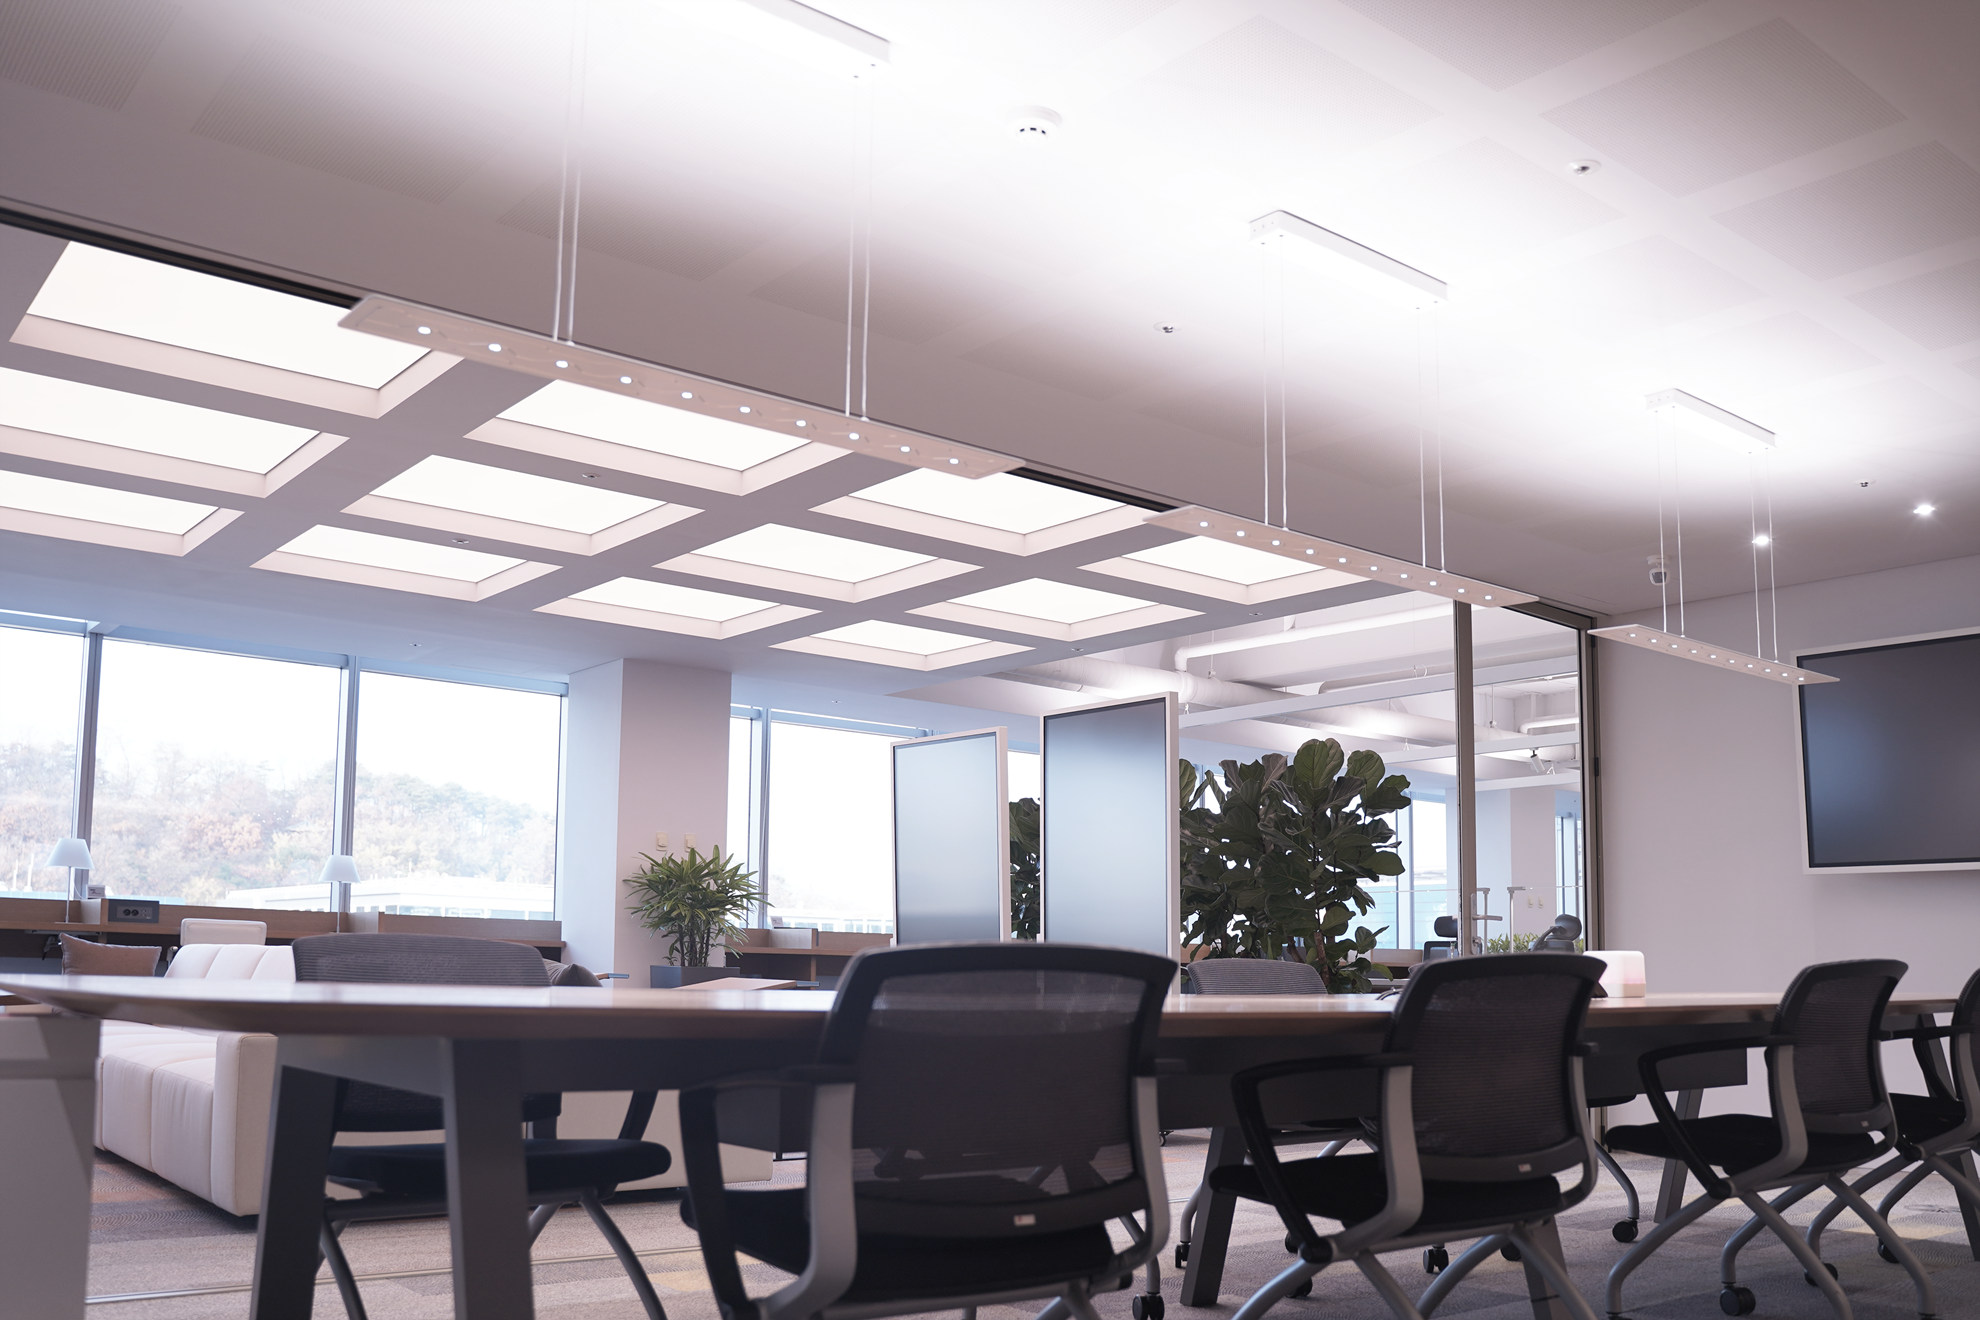 Three of our minimalistic luminaire, The Plane, lighting up a beautiful office space